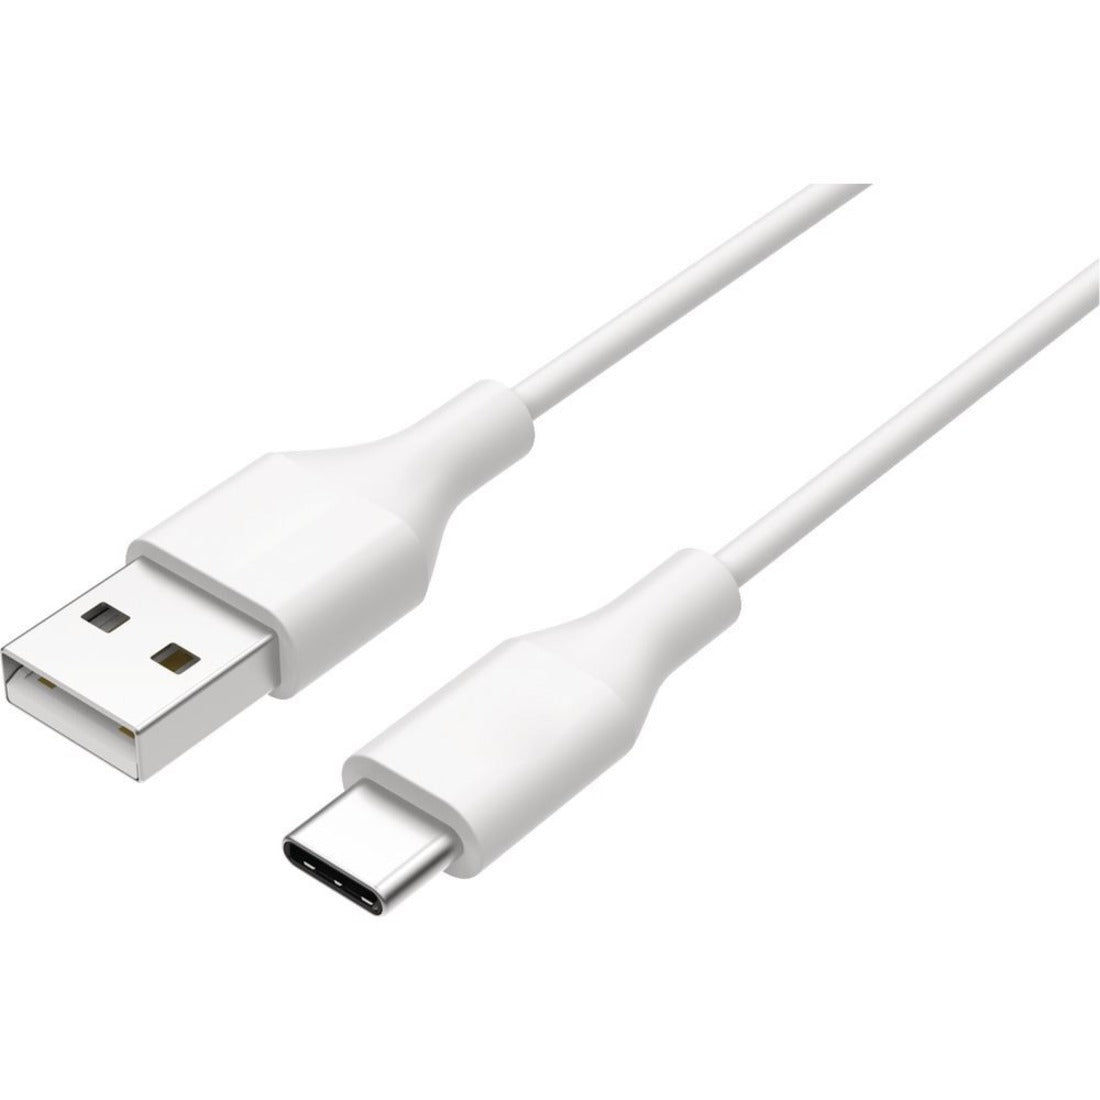 4XEM 4XSAMKITUSBCW3 Samsung USB-C 3FT Charger Kit (White), 1 Year Warranty, 3 ft Cable Length